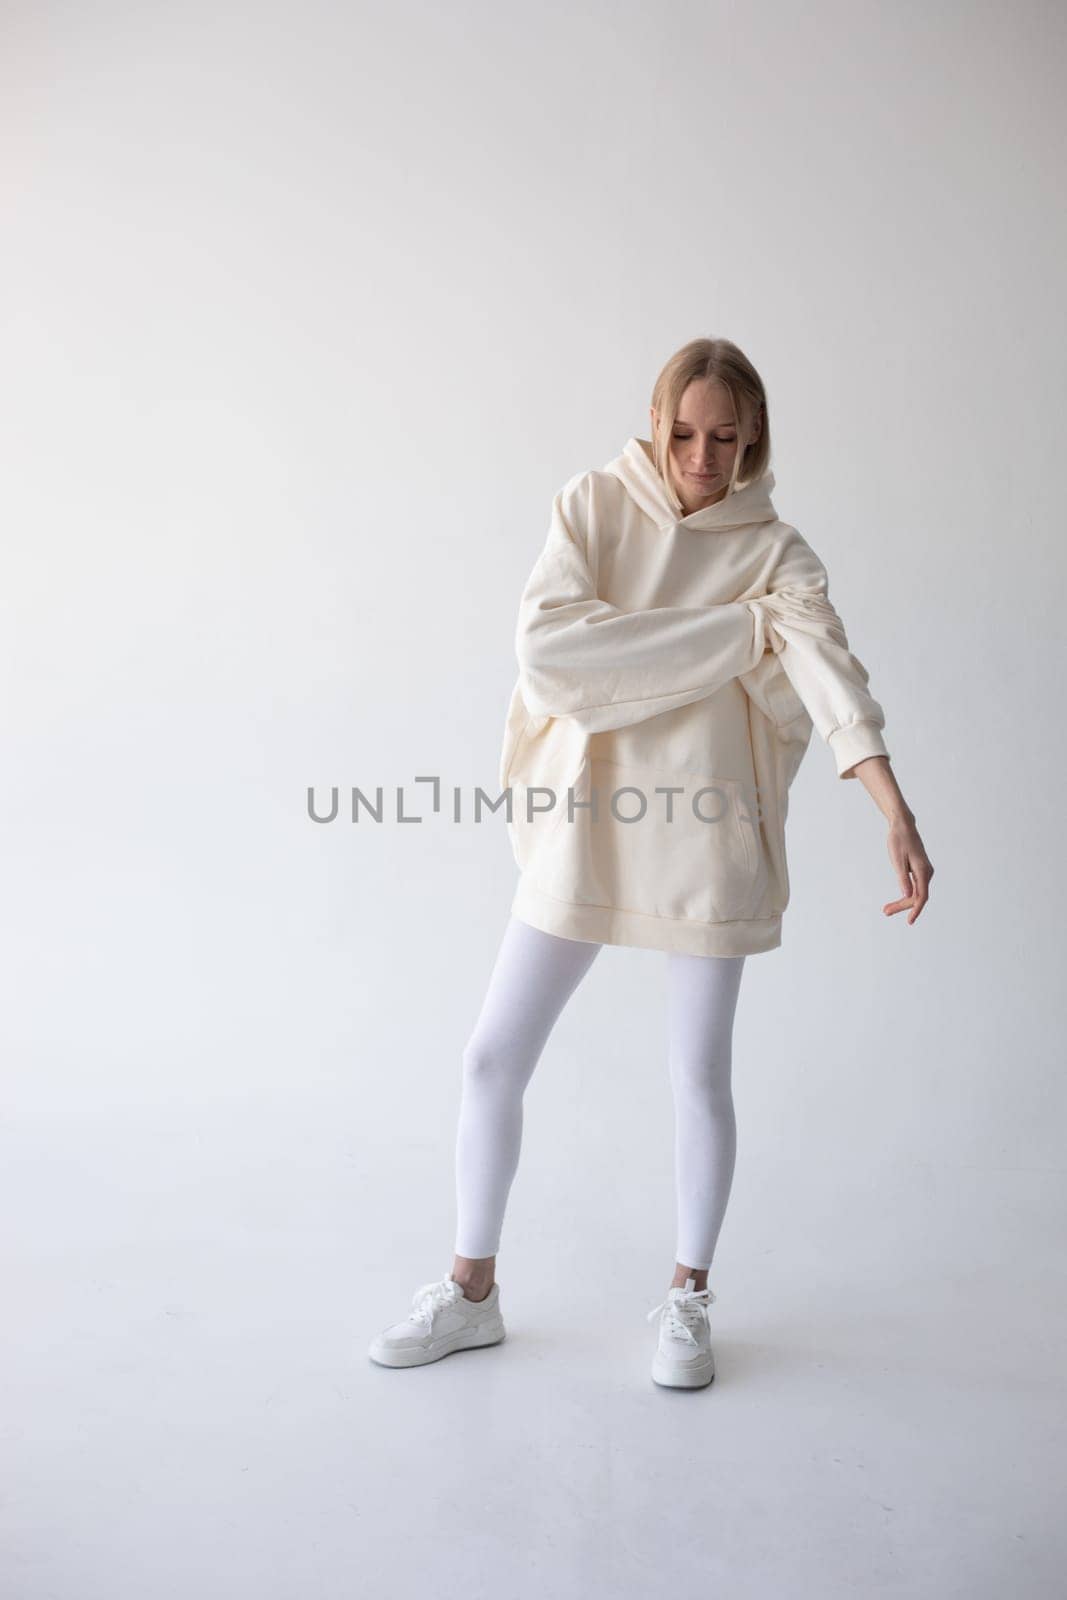 Blonde girl in a white hoodie and tights posing on a white background by Freeman_Studio